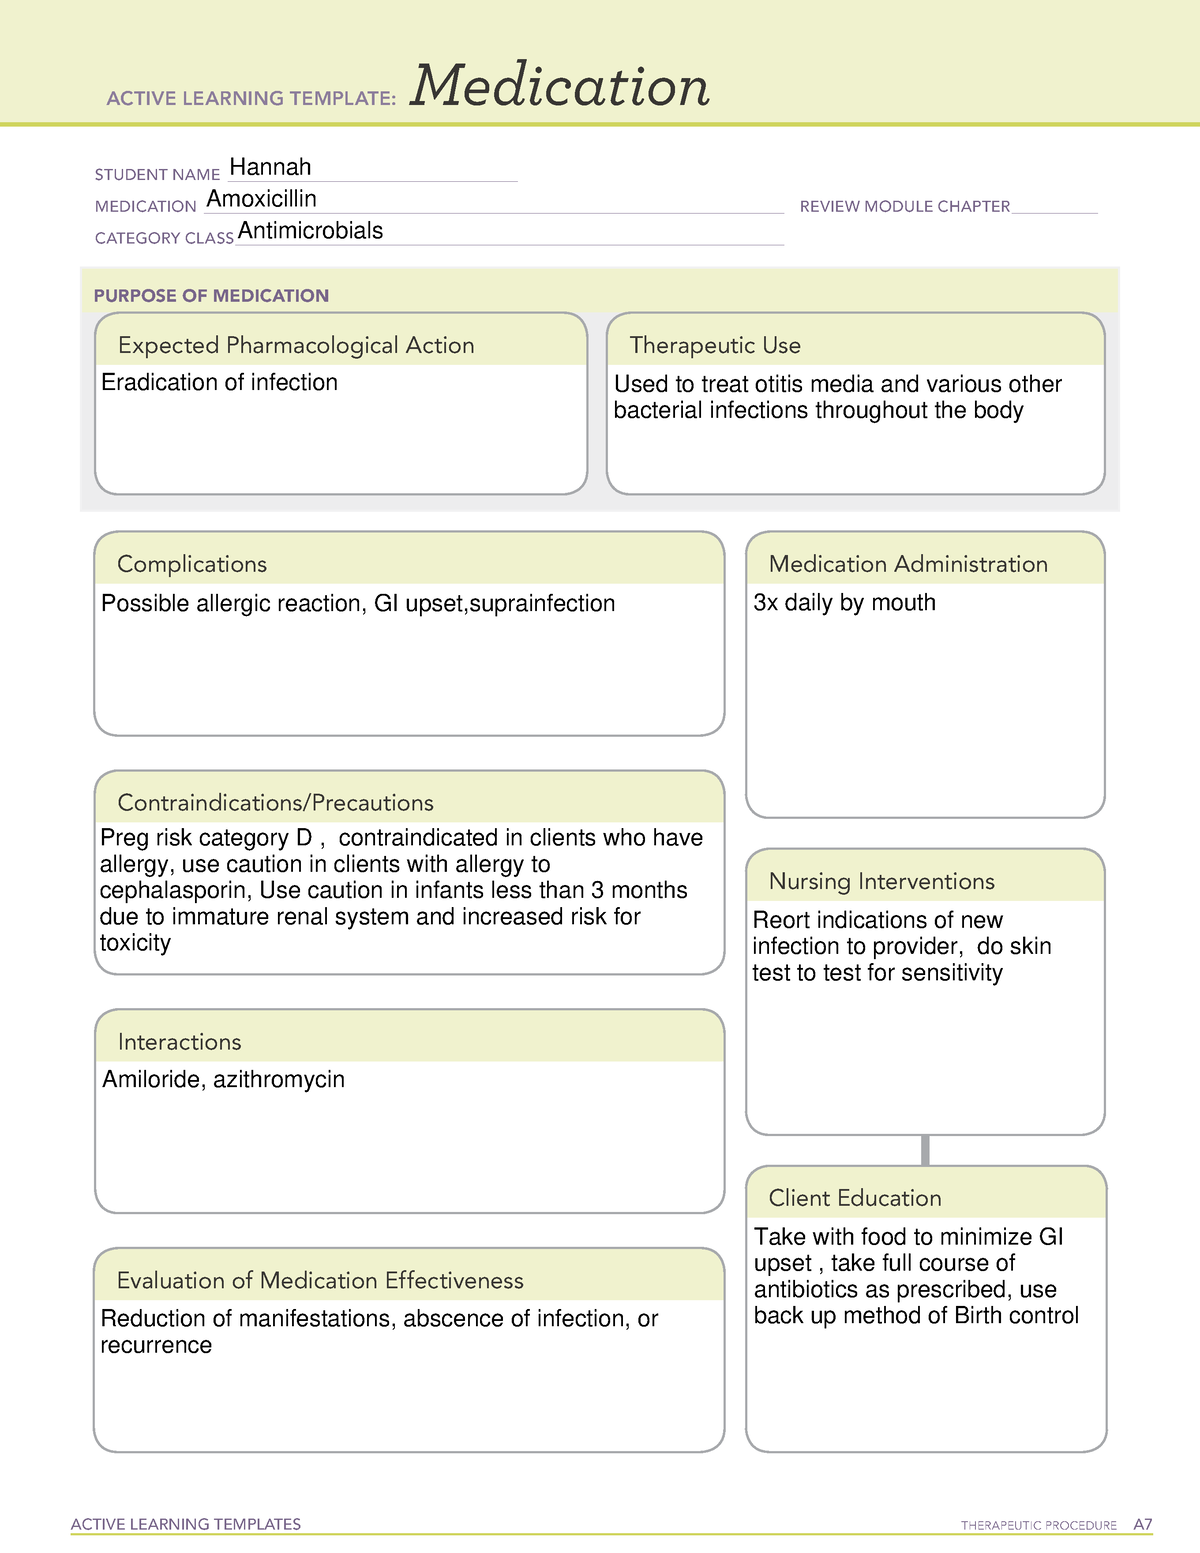 Amoxicillin Drug template for ATI drug cards ACTIVE LEARNING